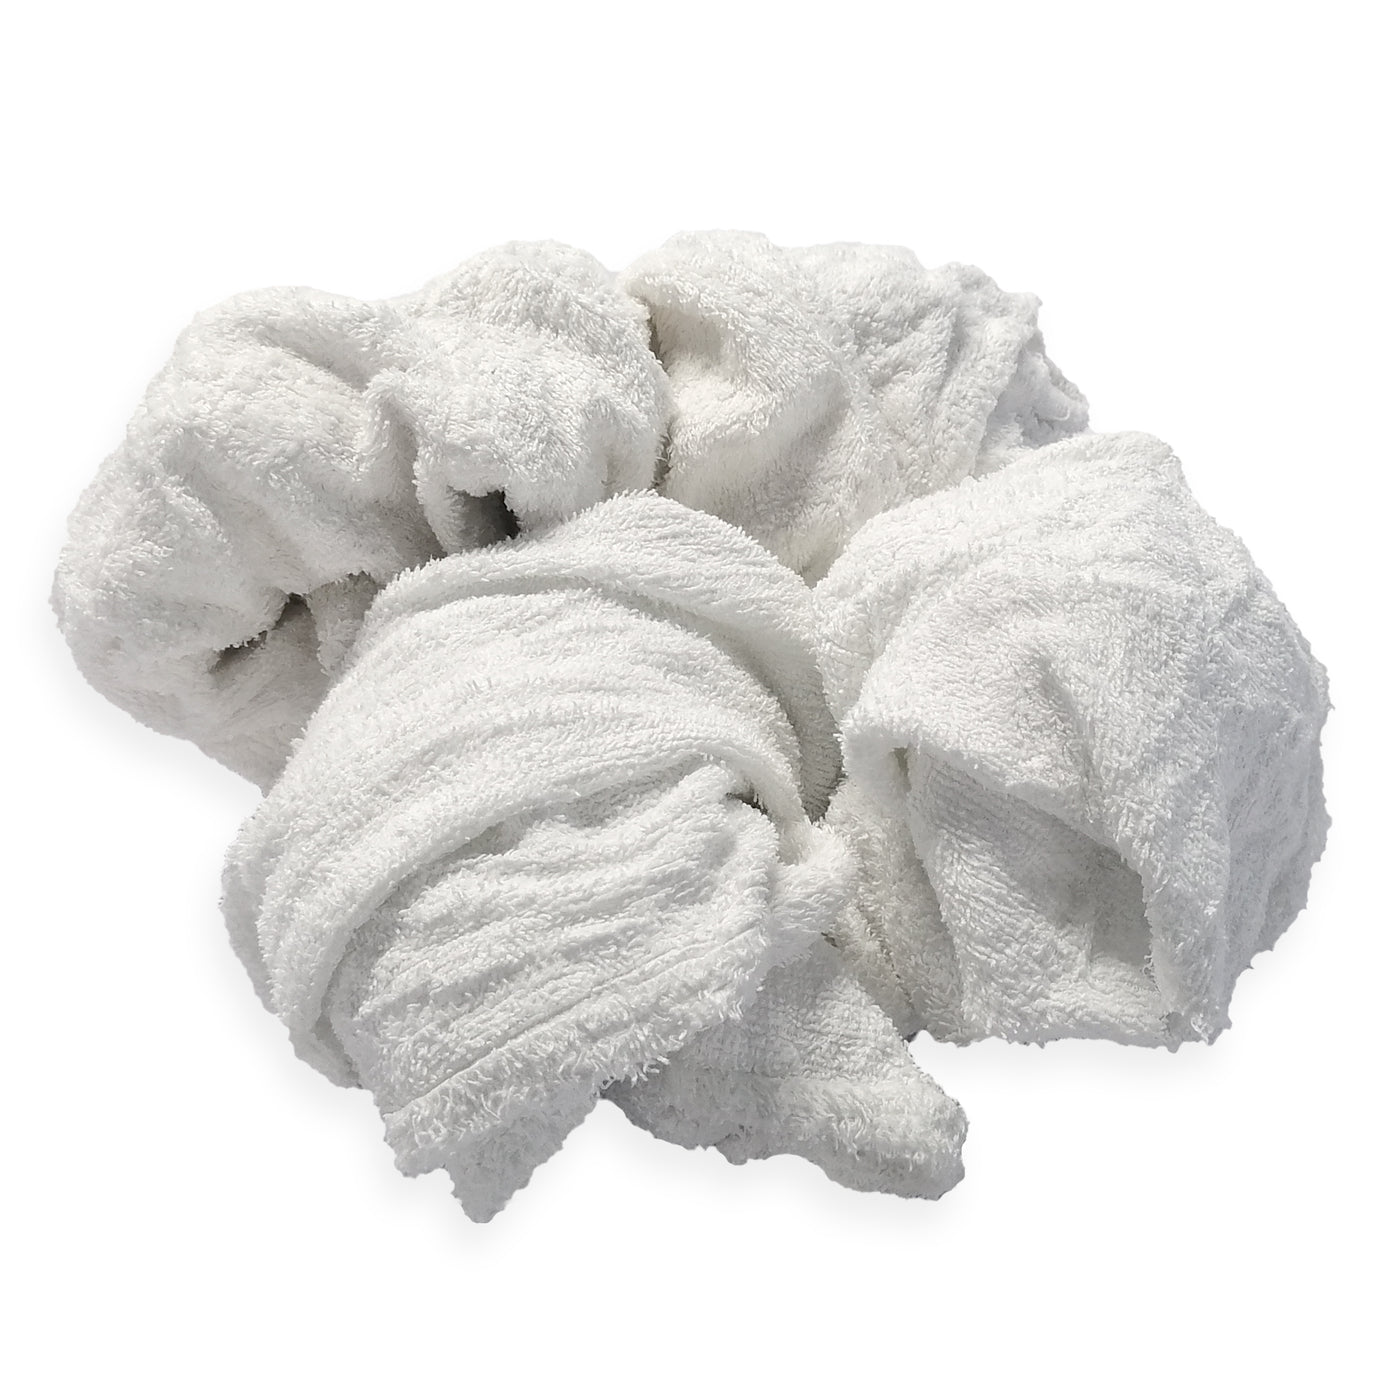 Wiping World White Knit T-Shirt 100% Cotton Cleaning Rags 10 lbs. Bag - Multipurpose Cleaning